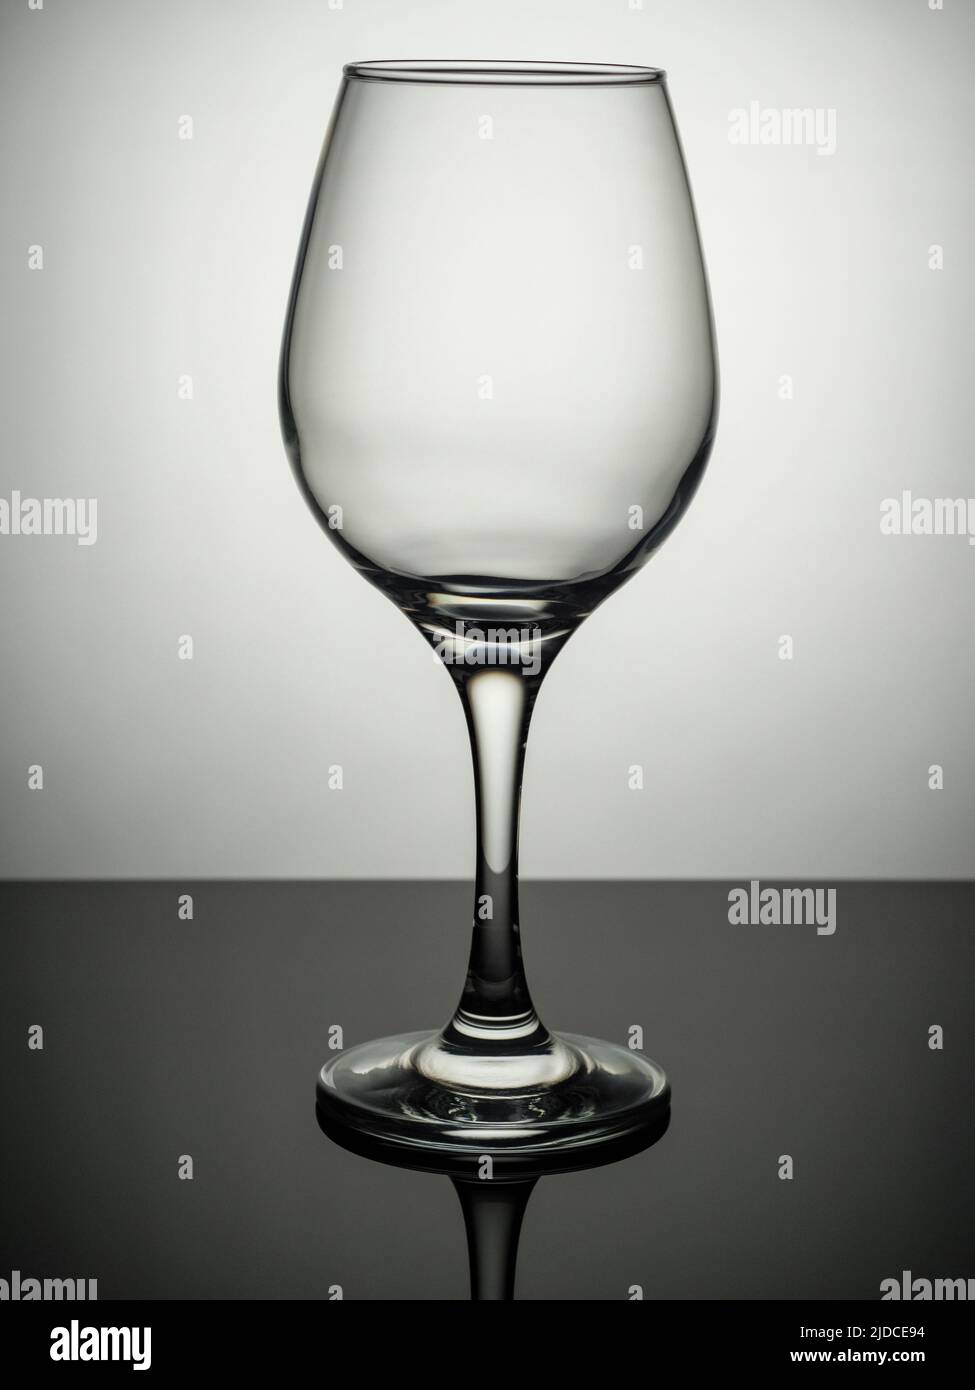 An empty wine glass stands on a grey surface Stock Photo